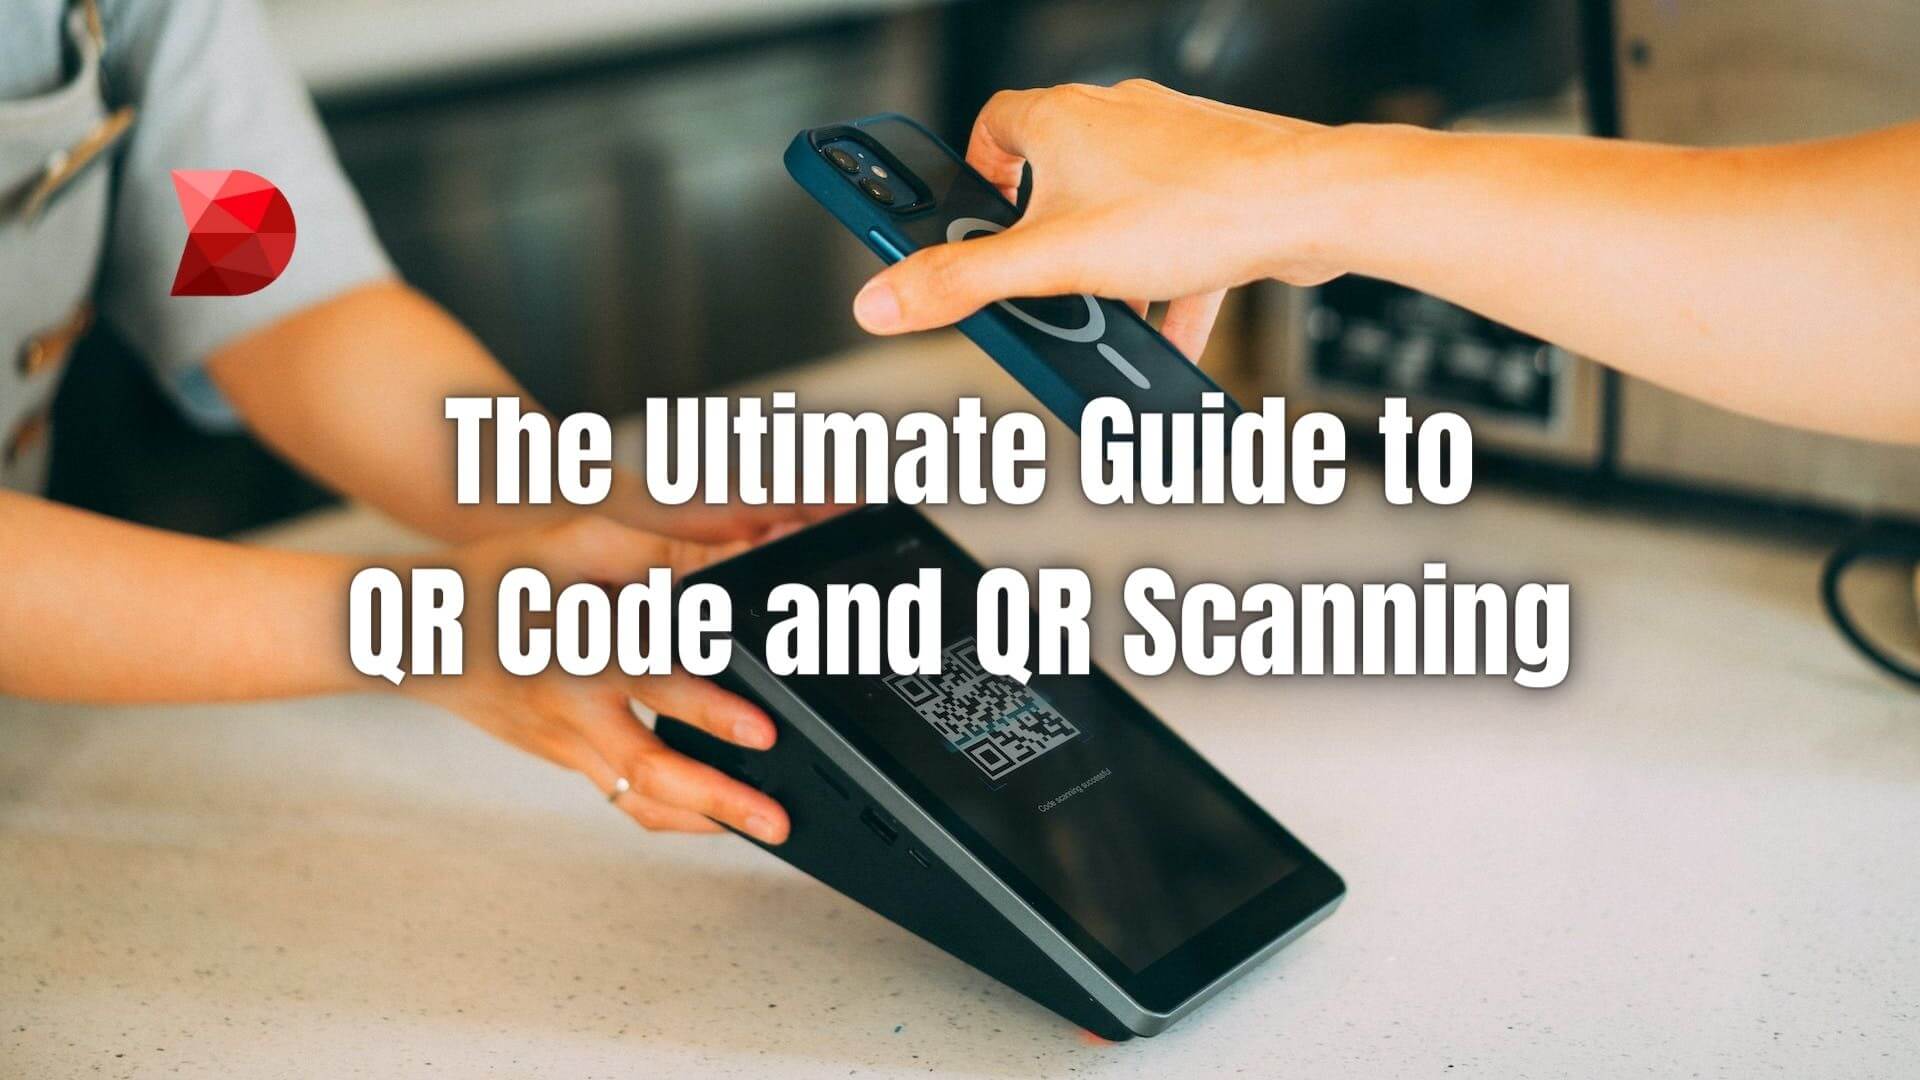 This article will discuss what QR codes are, the different types of QR codes and why they are so important. Read here to learn more!